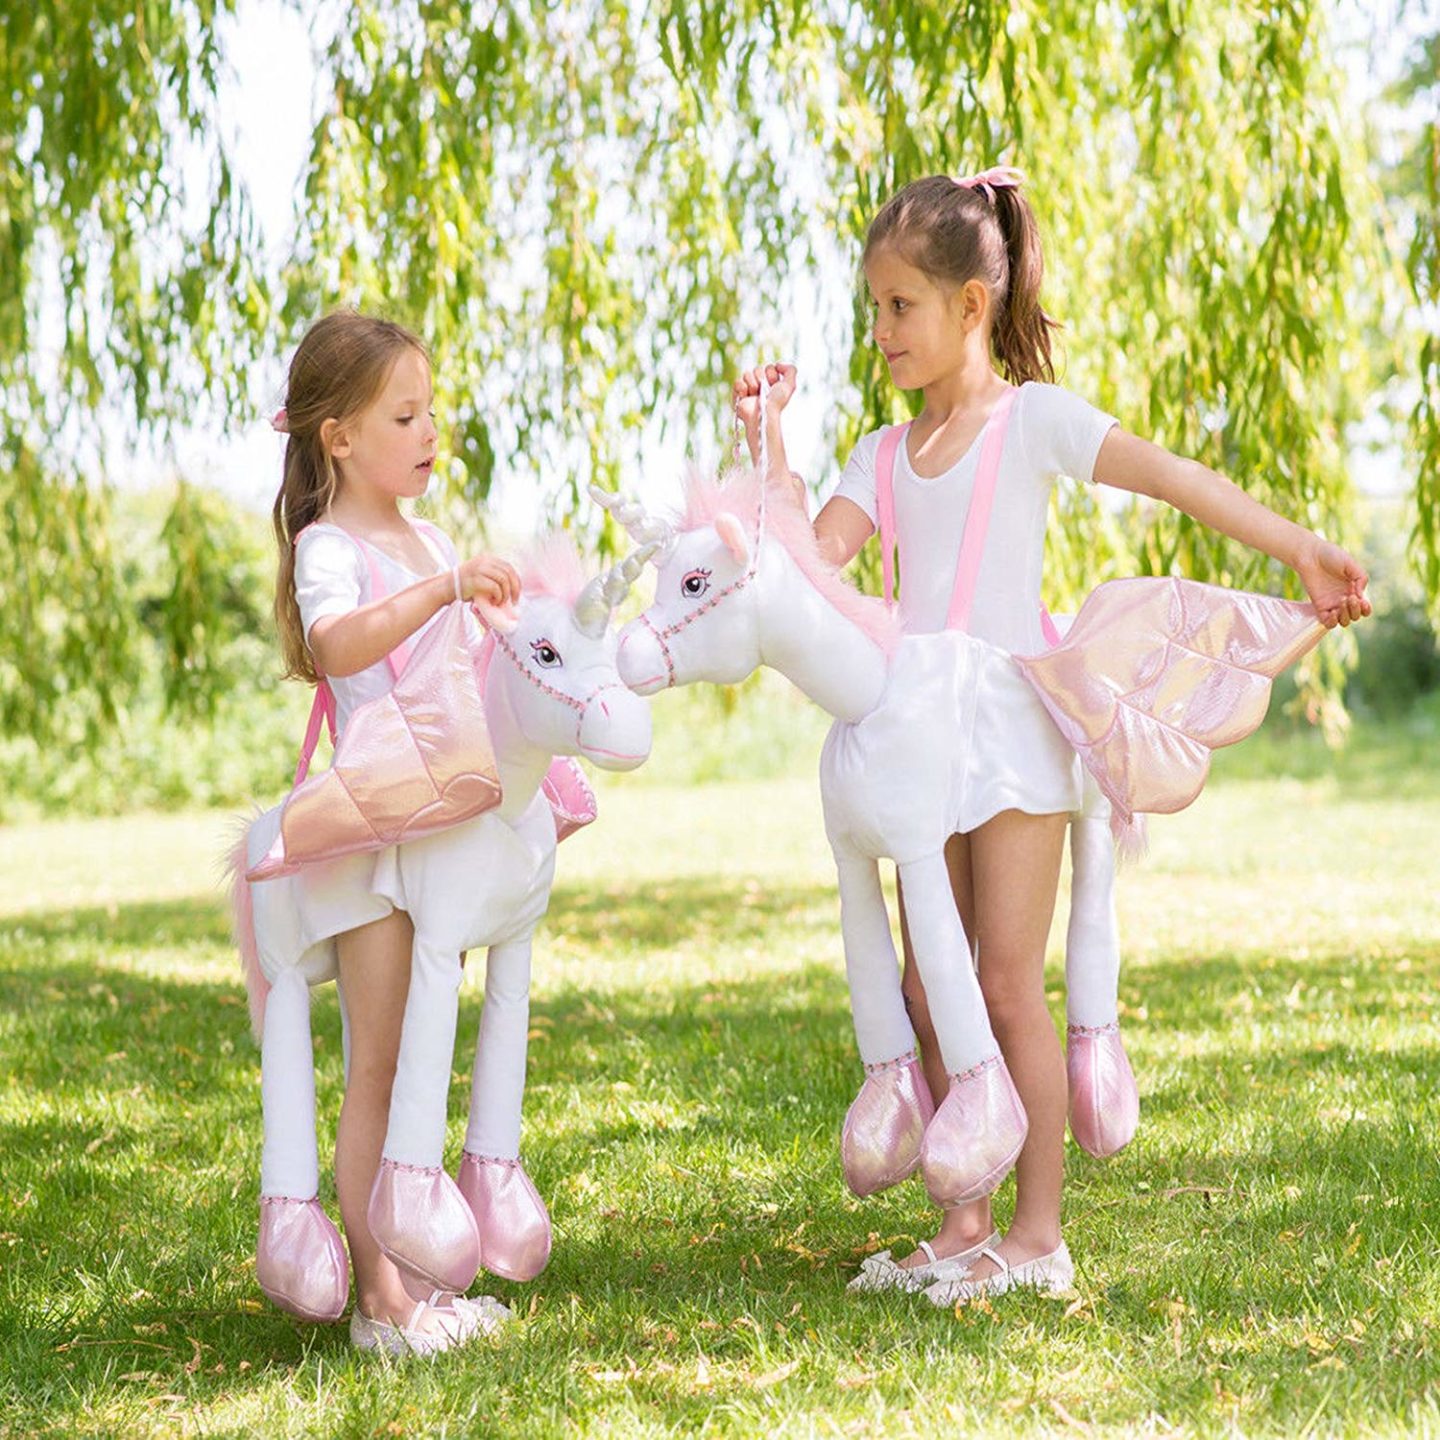 10 best unicorn gifts for kids